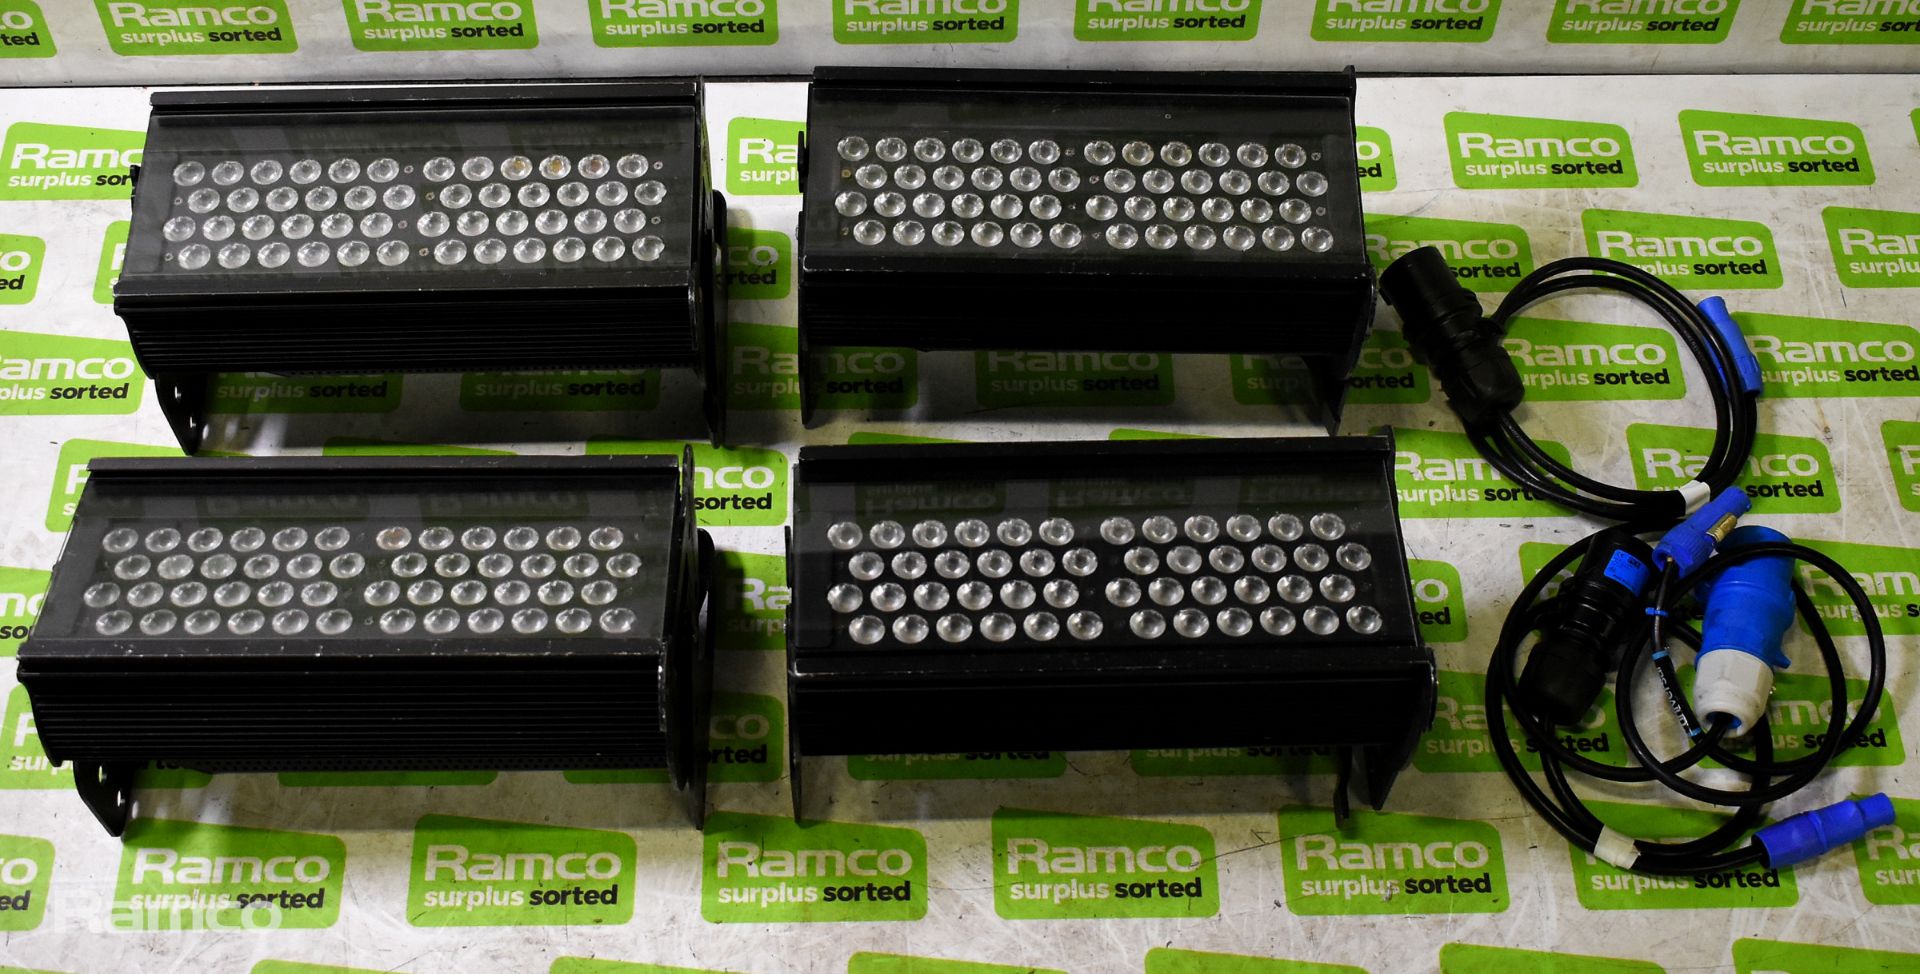 4x Chroma-Q Color Force 12 LED fixture lights and 3x power cables with flight case - 1x FAULTY LIGHT - Image 5 of 10